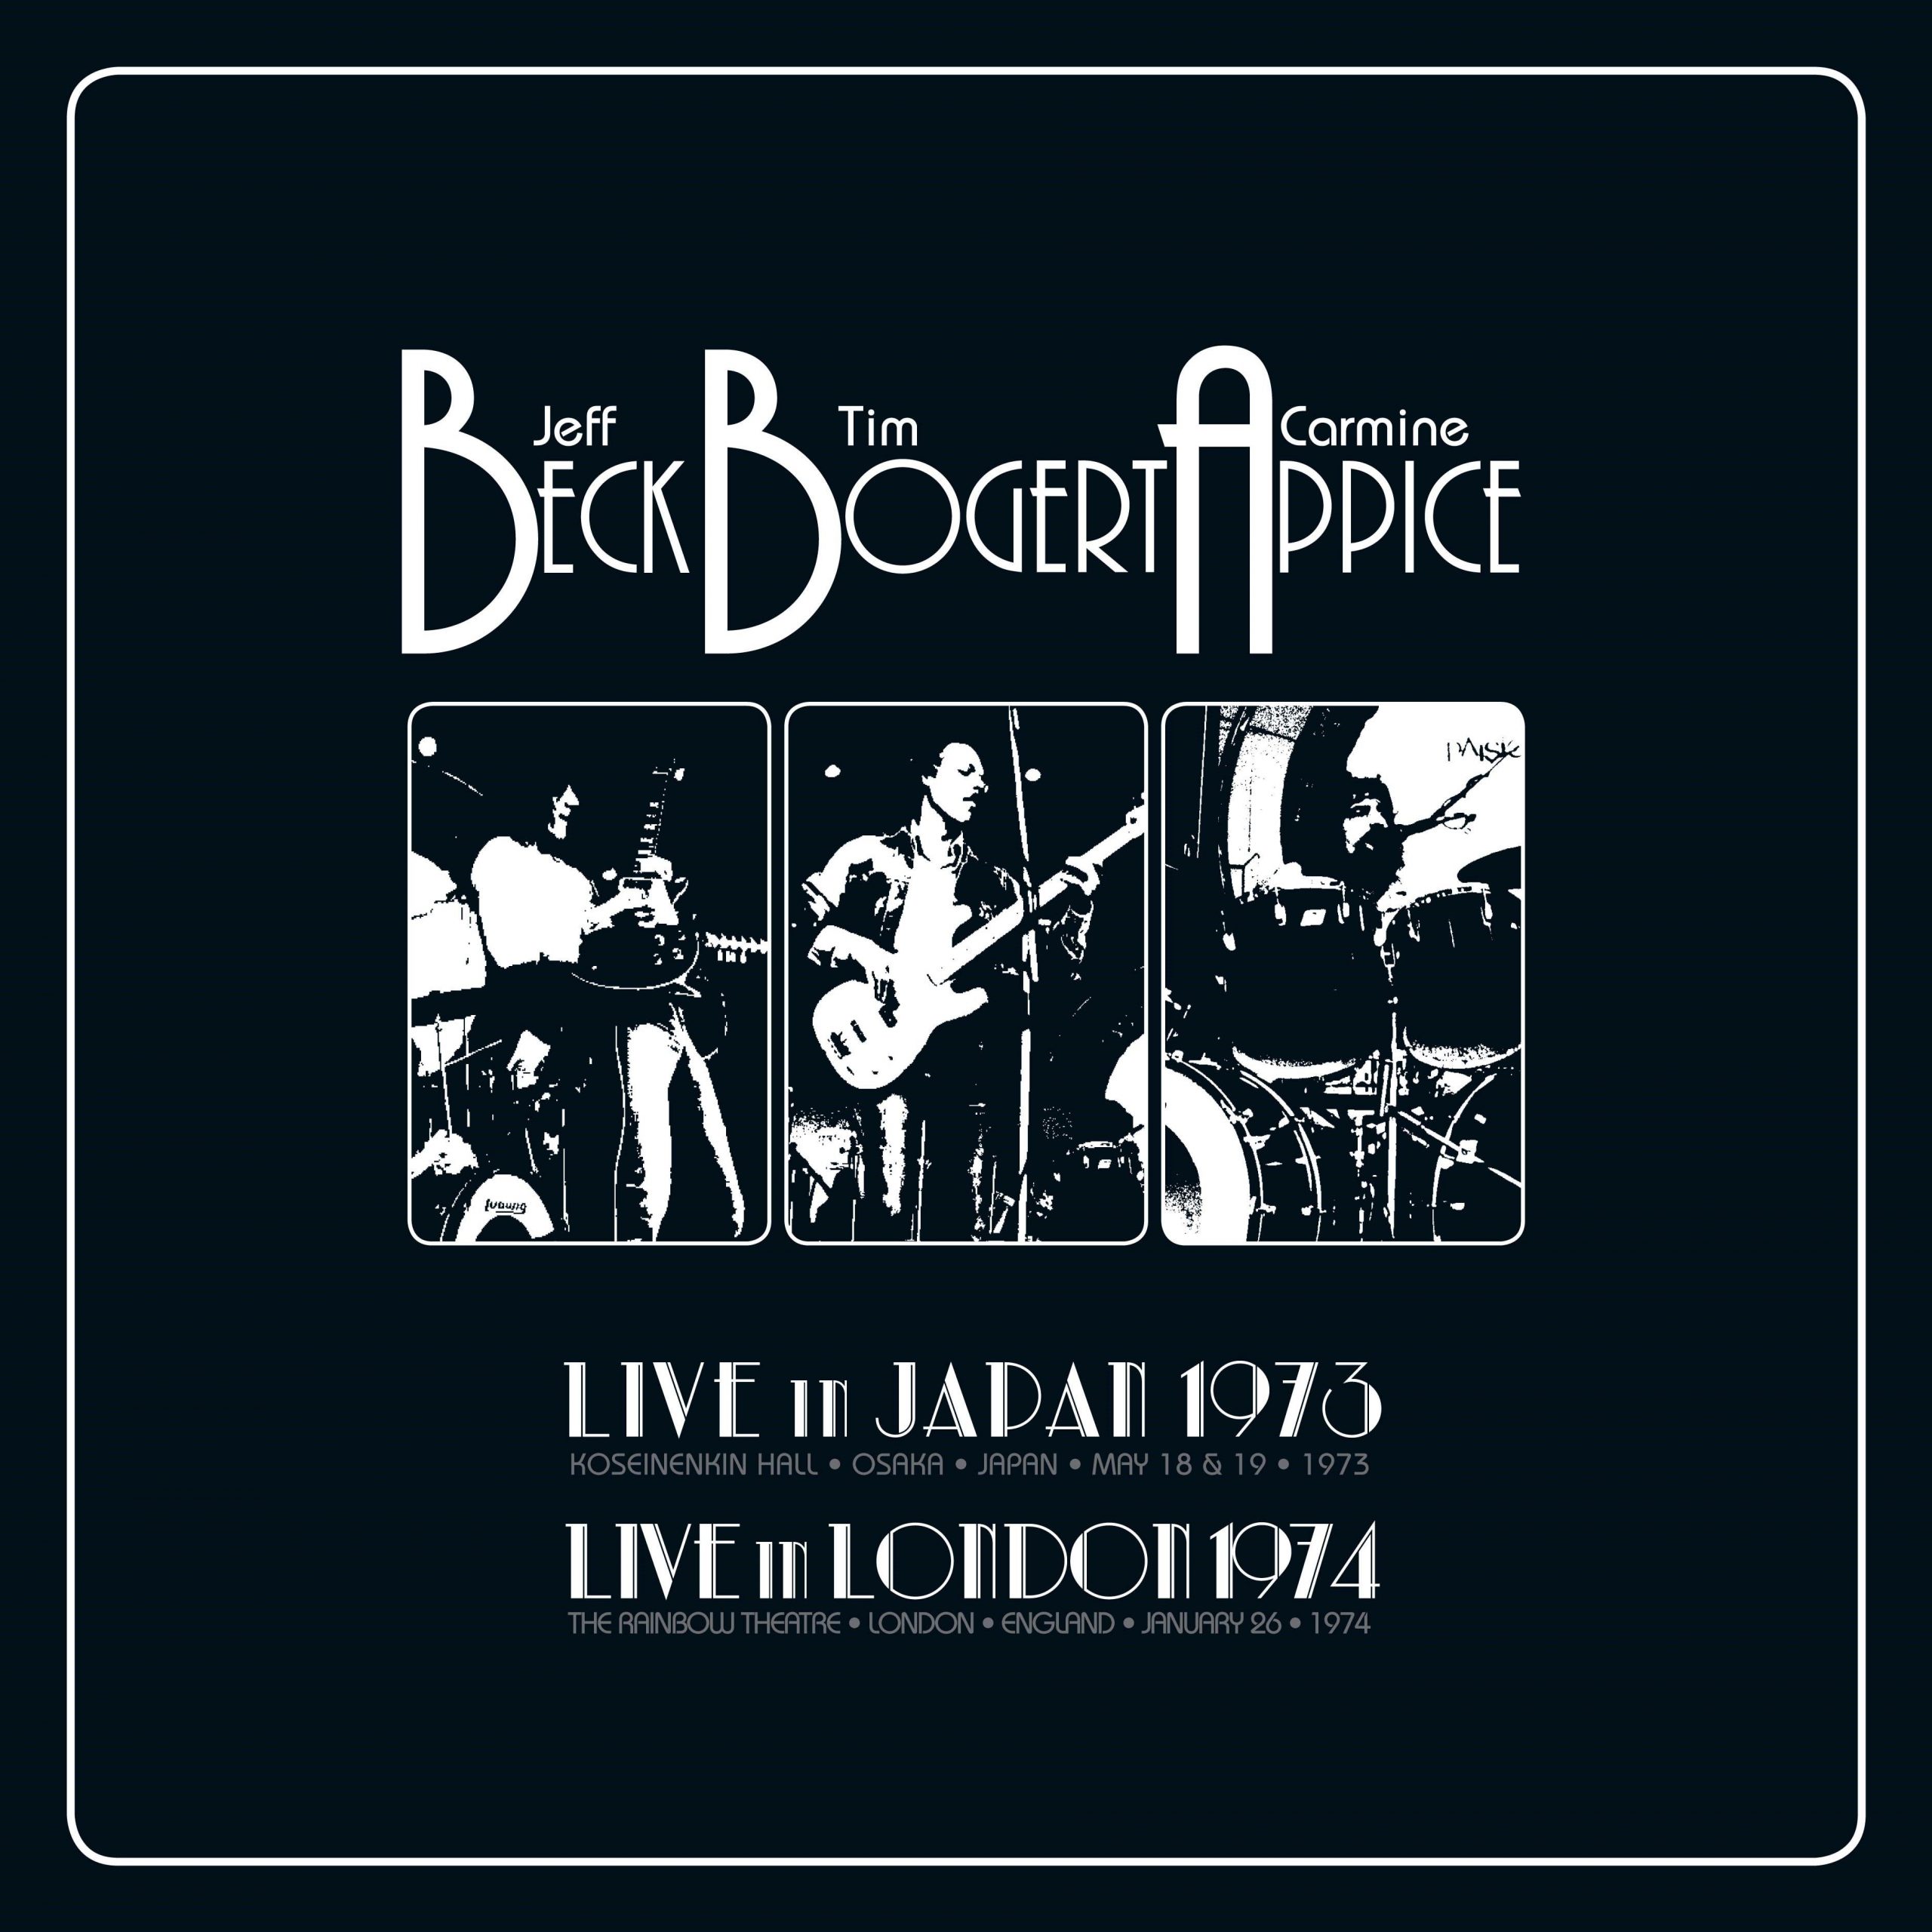 BECK, BOGERT & APPICE: Live In Japan 1973, Live In London 1974 